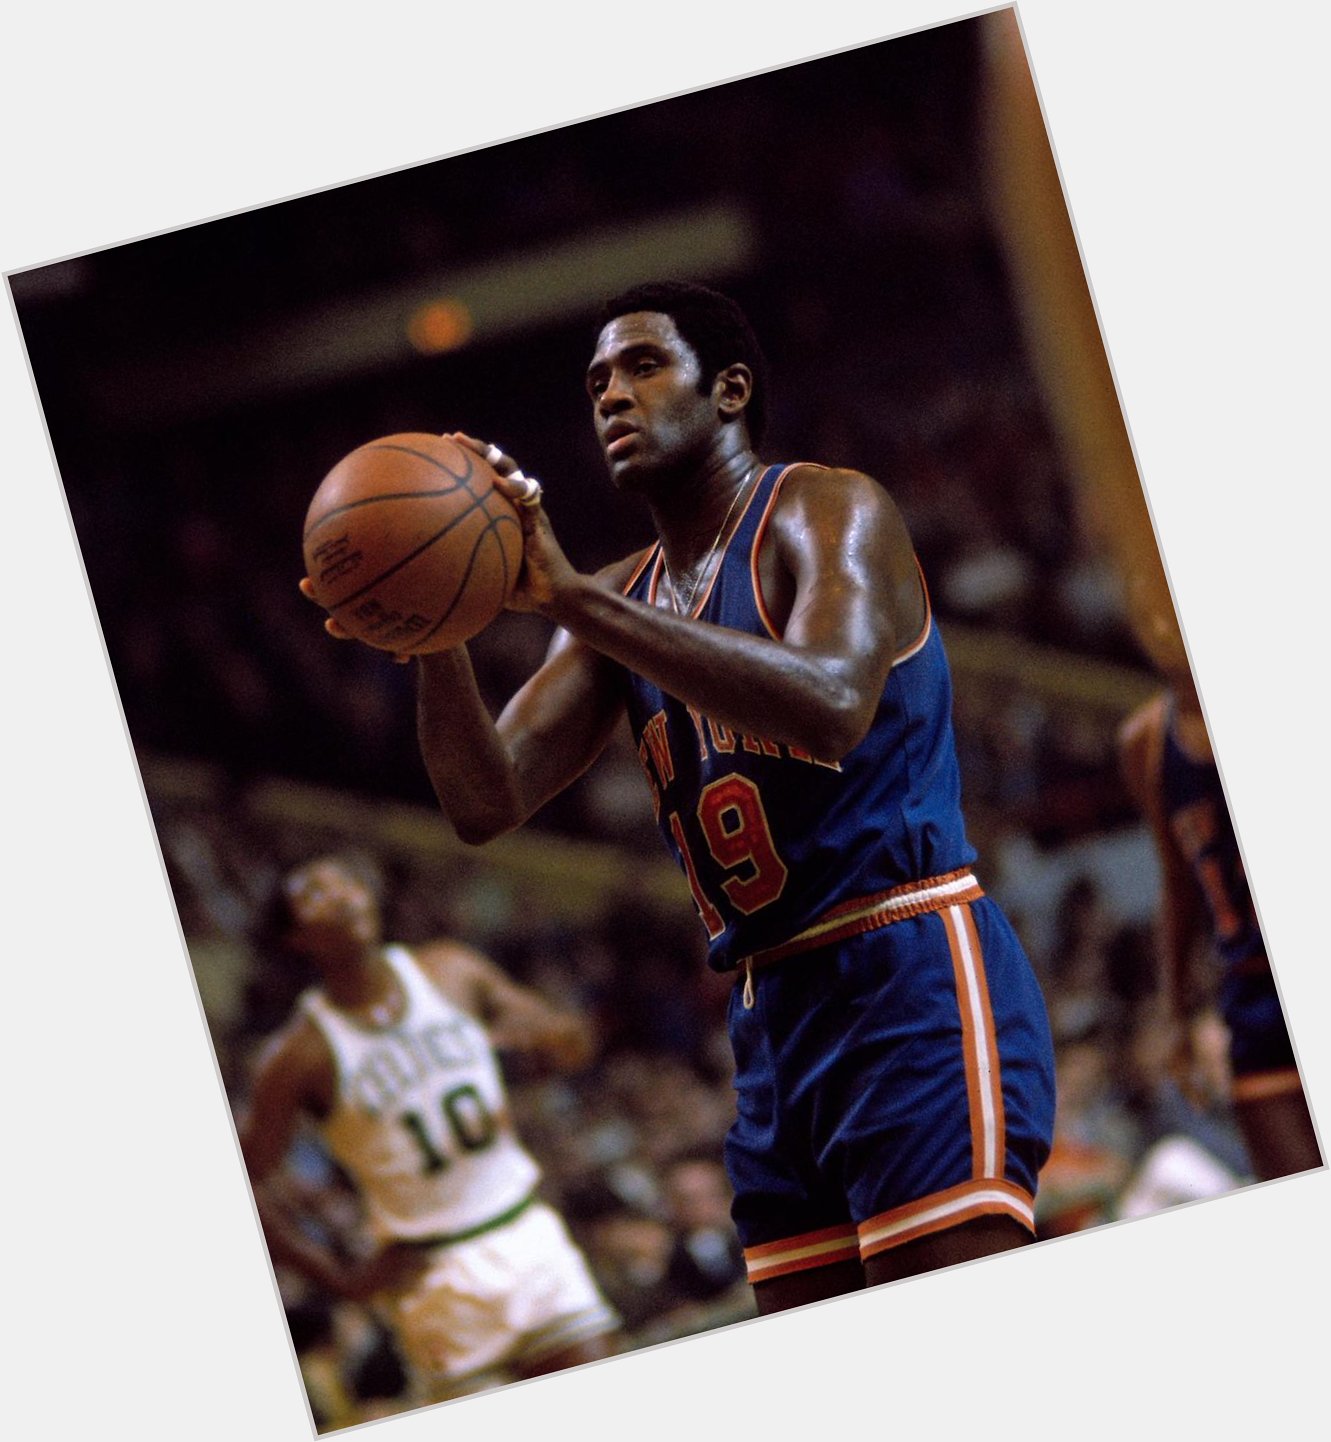 Happy 73rd Birthday to legend Willis Reed. 